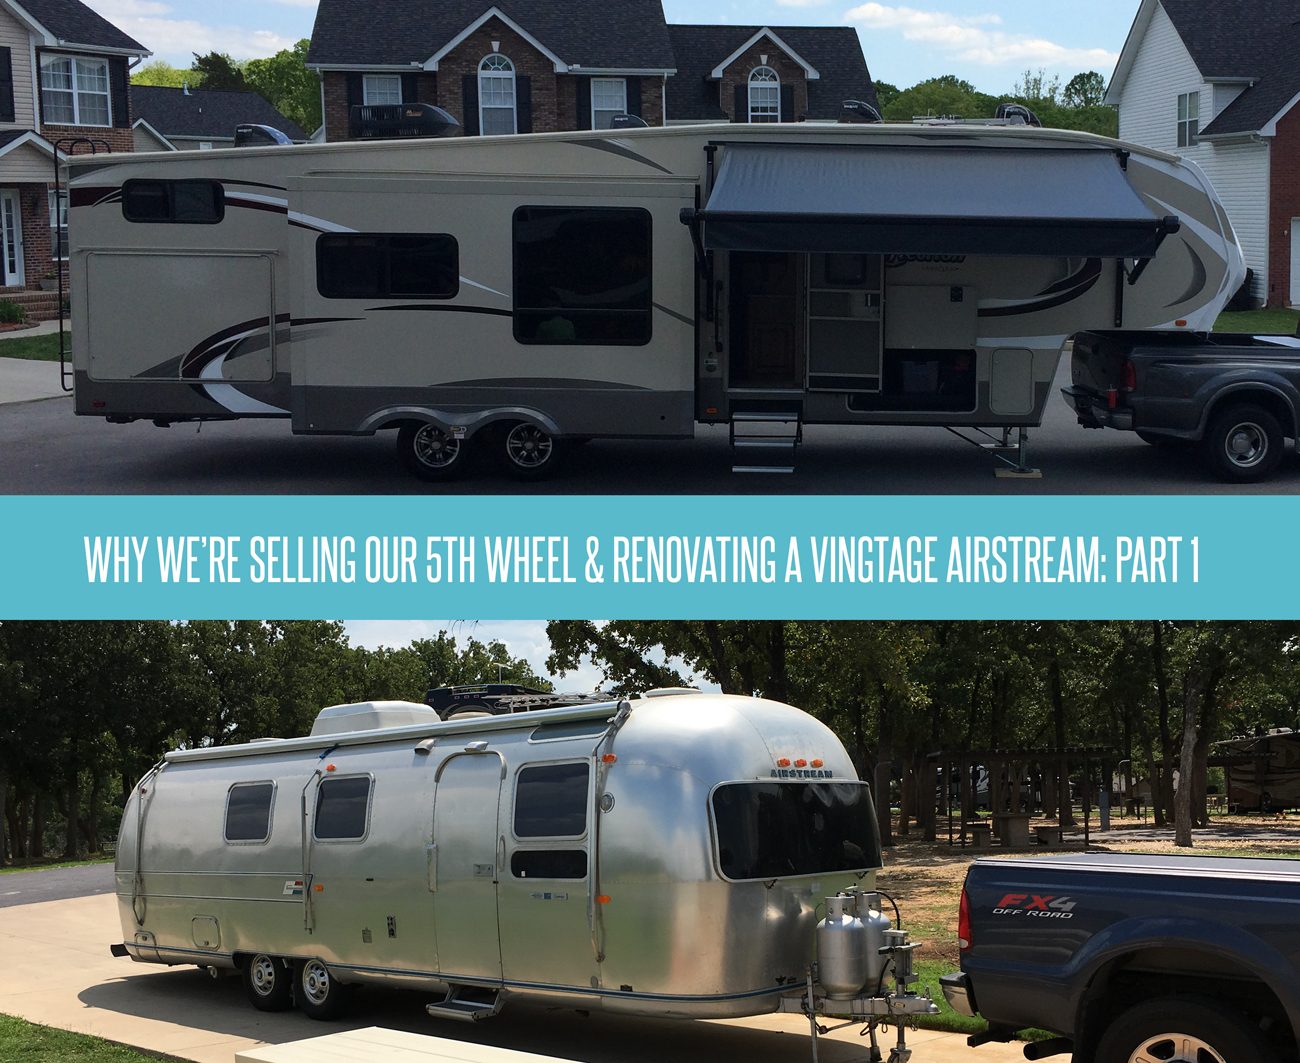 Why we're selling our 5th wheel and renovating a vintage airstream part 1